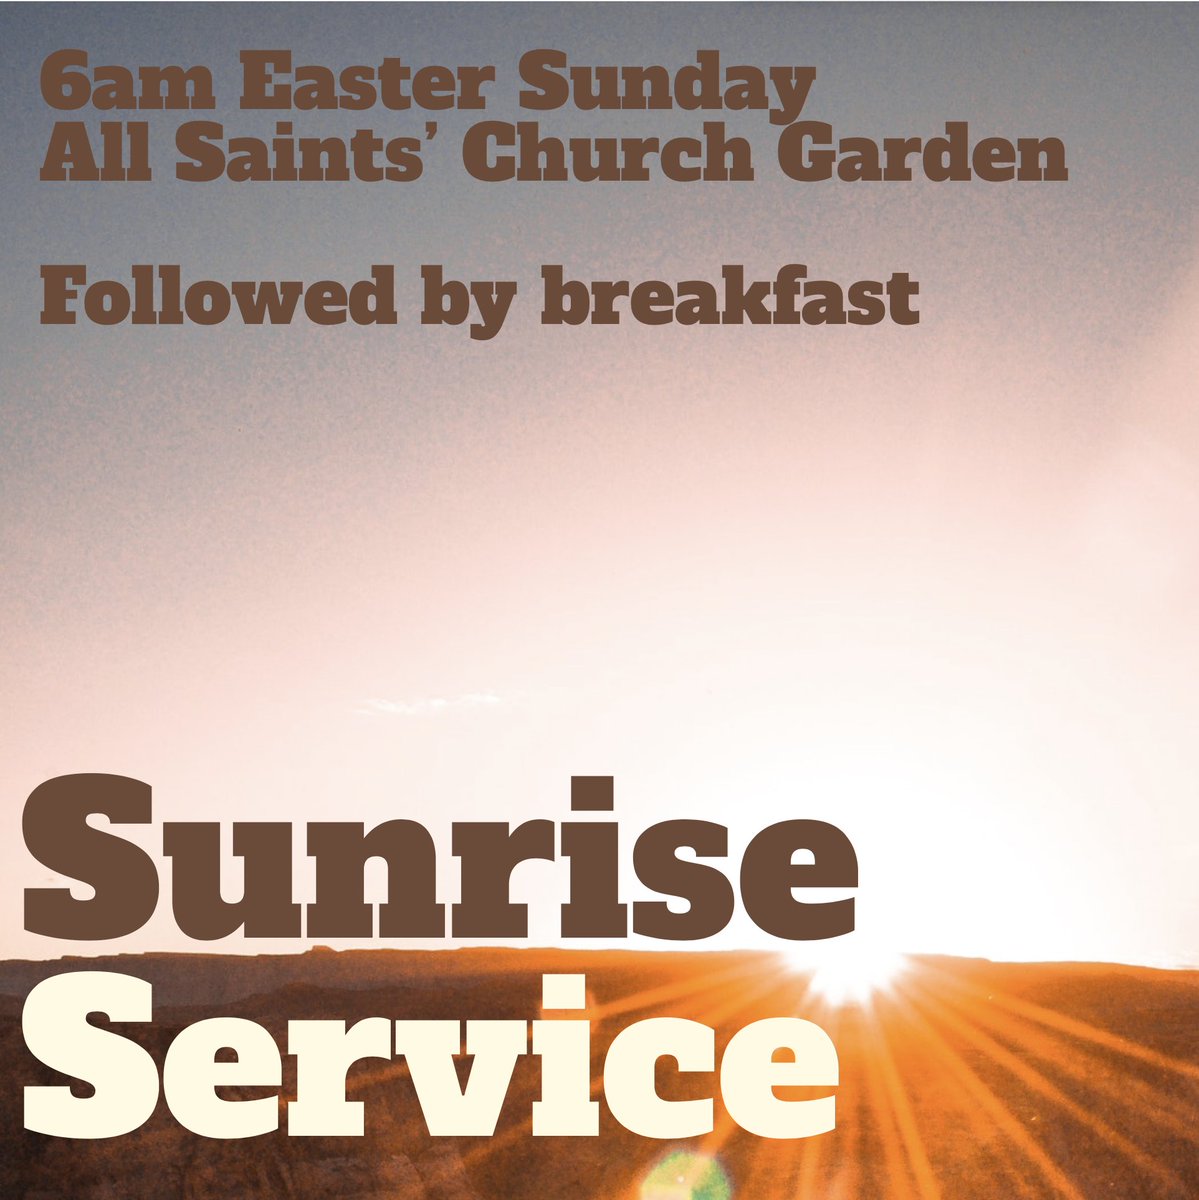 EASTER SUNRISE SERVICE We gather around a fire in the church garden then move indoors to renew baptismal vows around the font and share the first communion of Easter. Followed by a hot vegetarian breakfast in the church hall